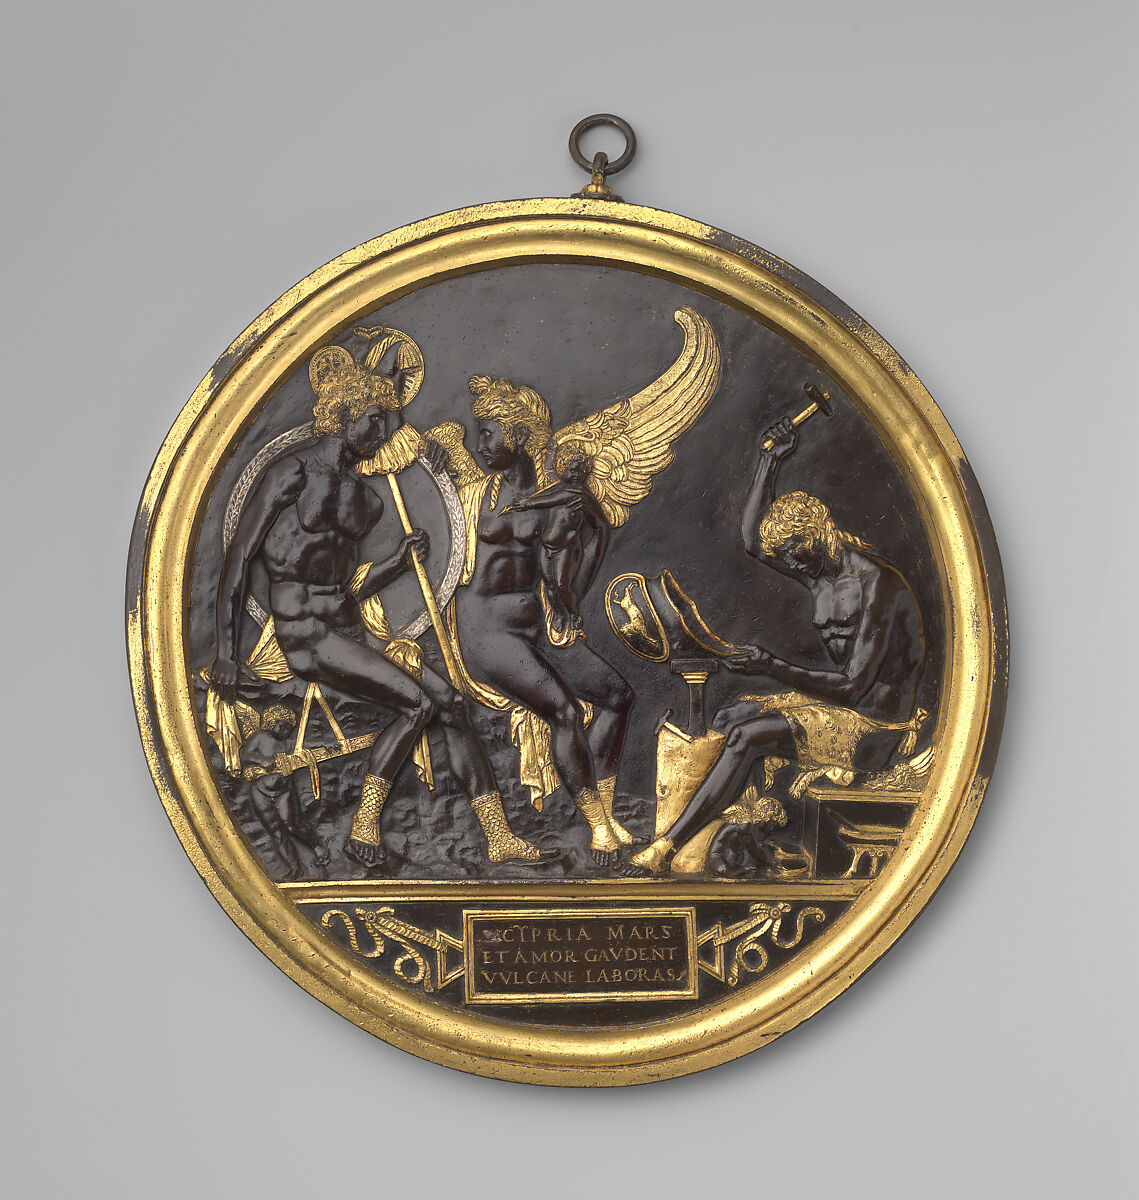 Mars, Venus and Cupid with Vulcan at his forge (the Mantuan Roundel), Gian Marco Cavalli  Italian, Parcel-gilt bronze with silver inlay, integrally cast gilt frame with suspension loop., Italian, Mantua